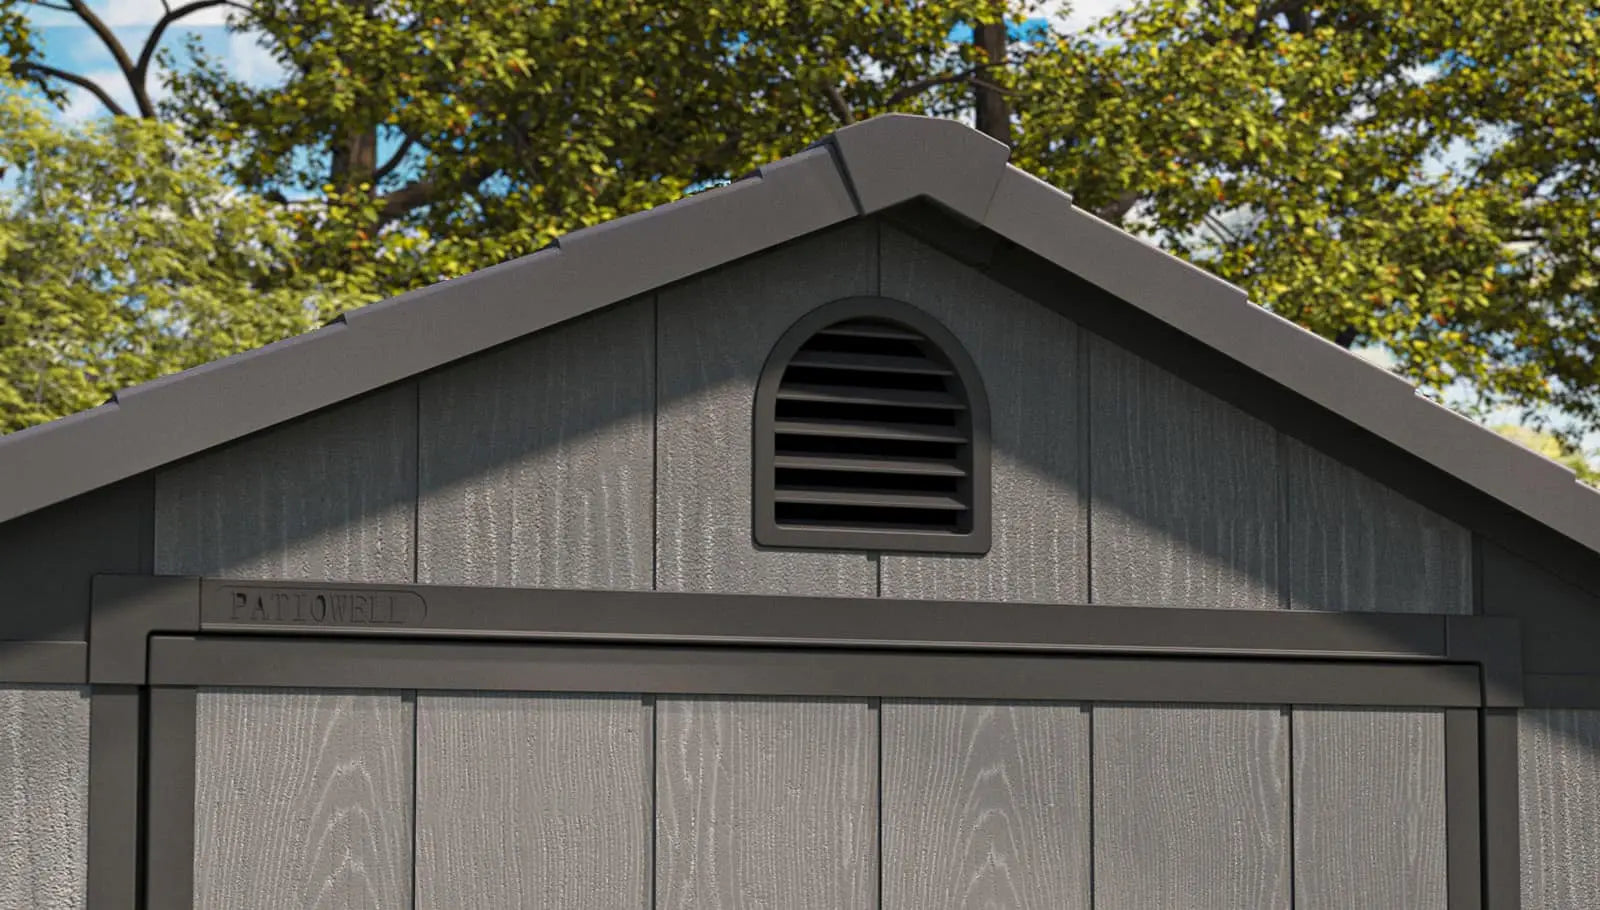 patiowell fit-it plastic storage shed air vent